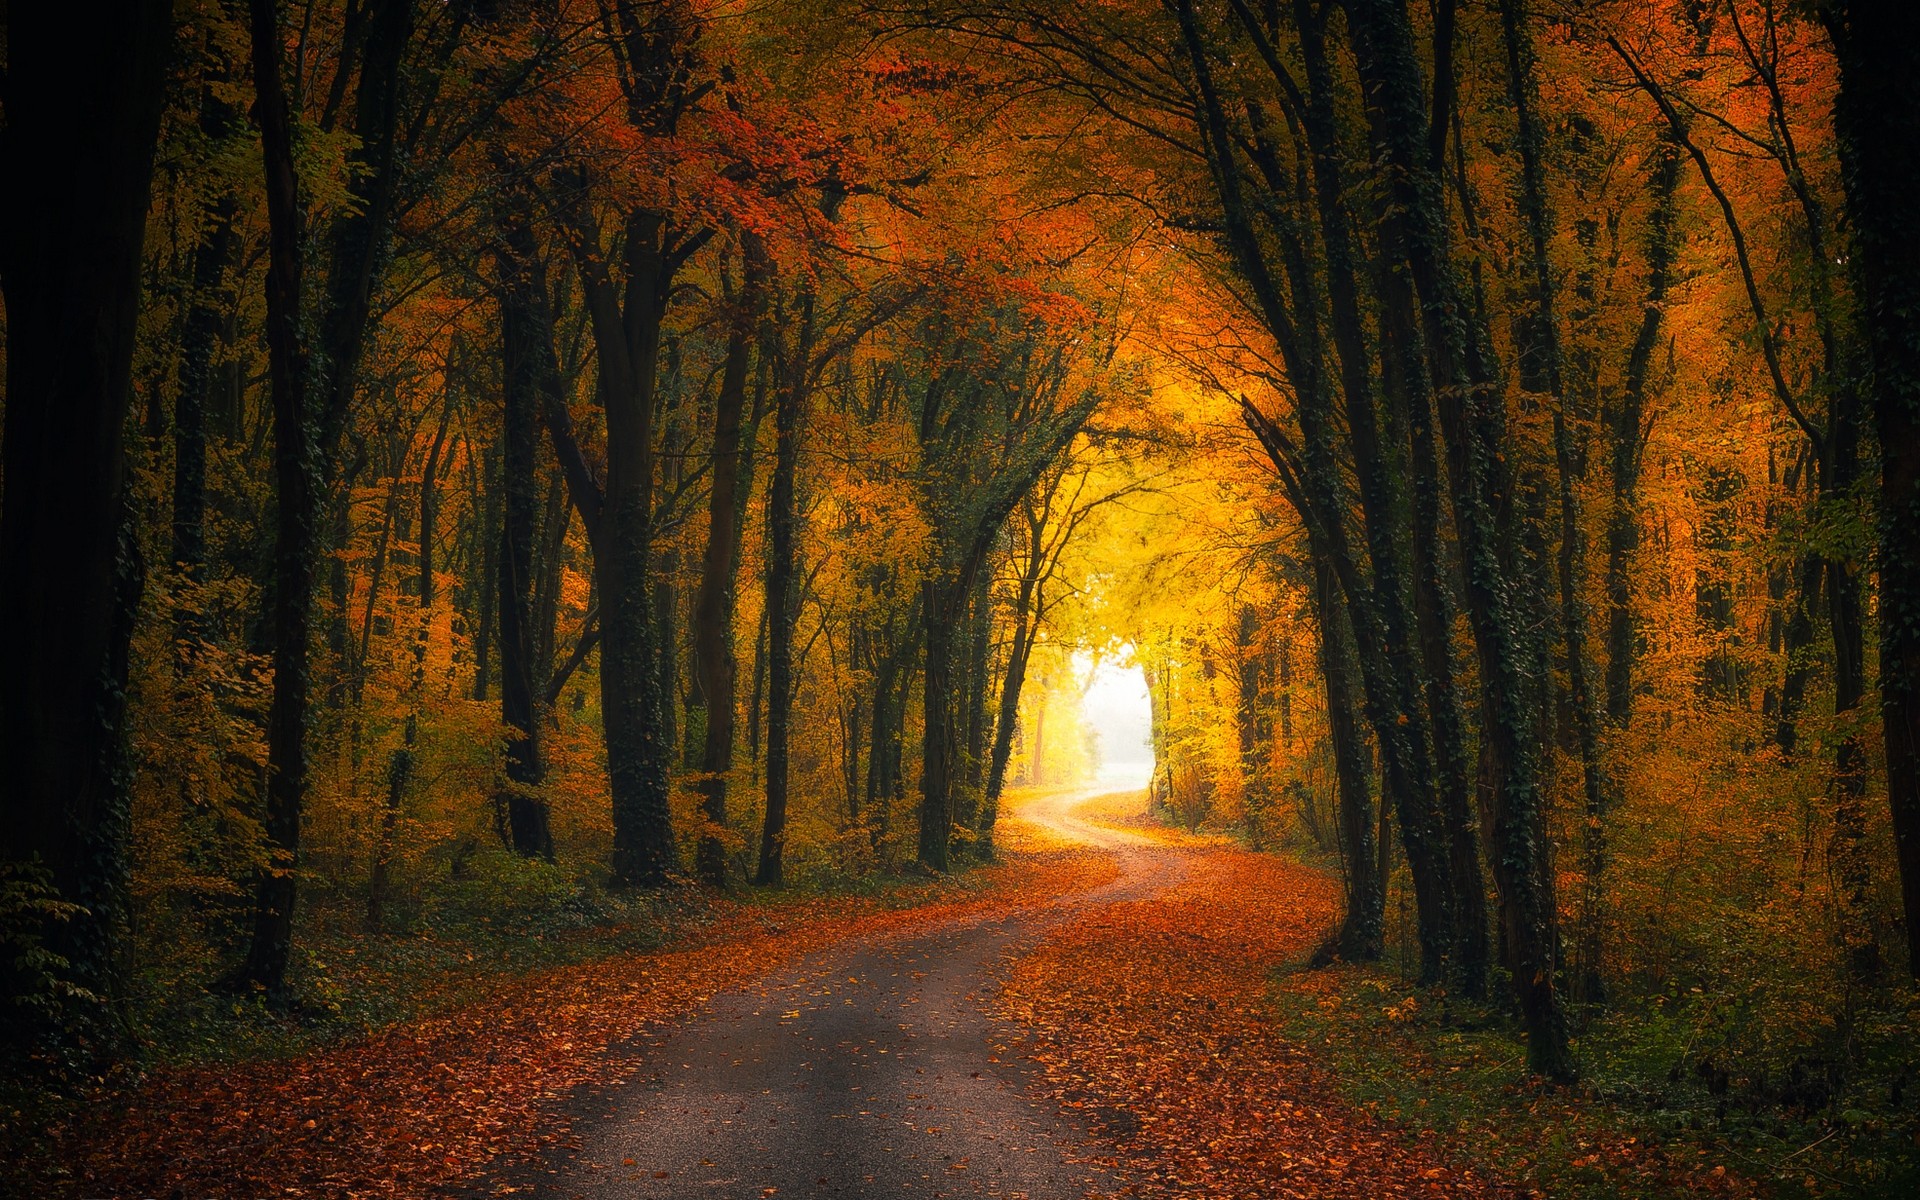 Nature Landscape Fall Road Forest Leaves Shrubs Sunlight Trees Tunnel Dirtroad Orange Yellow Fallen  1920x1200